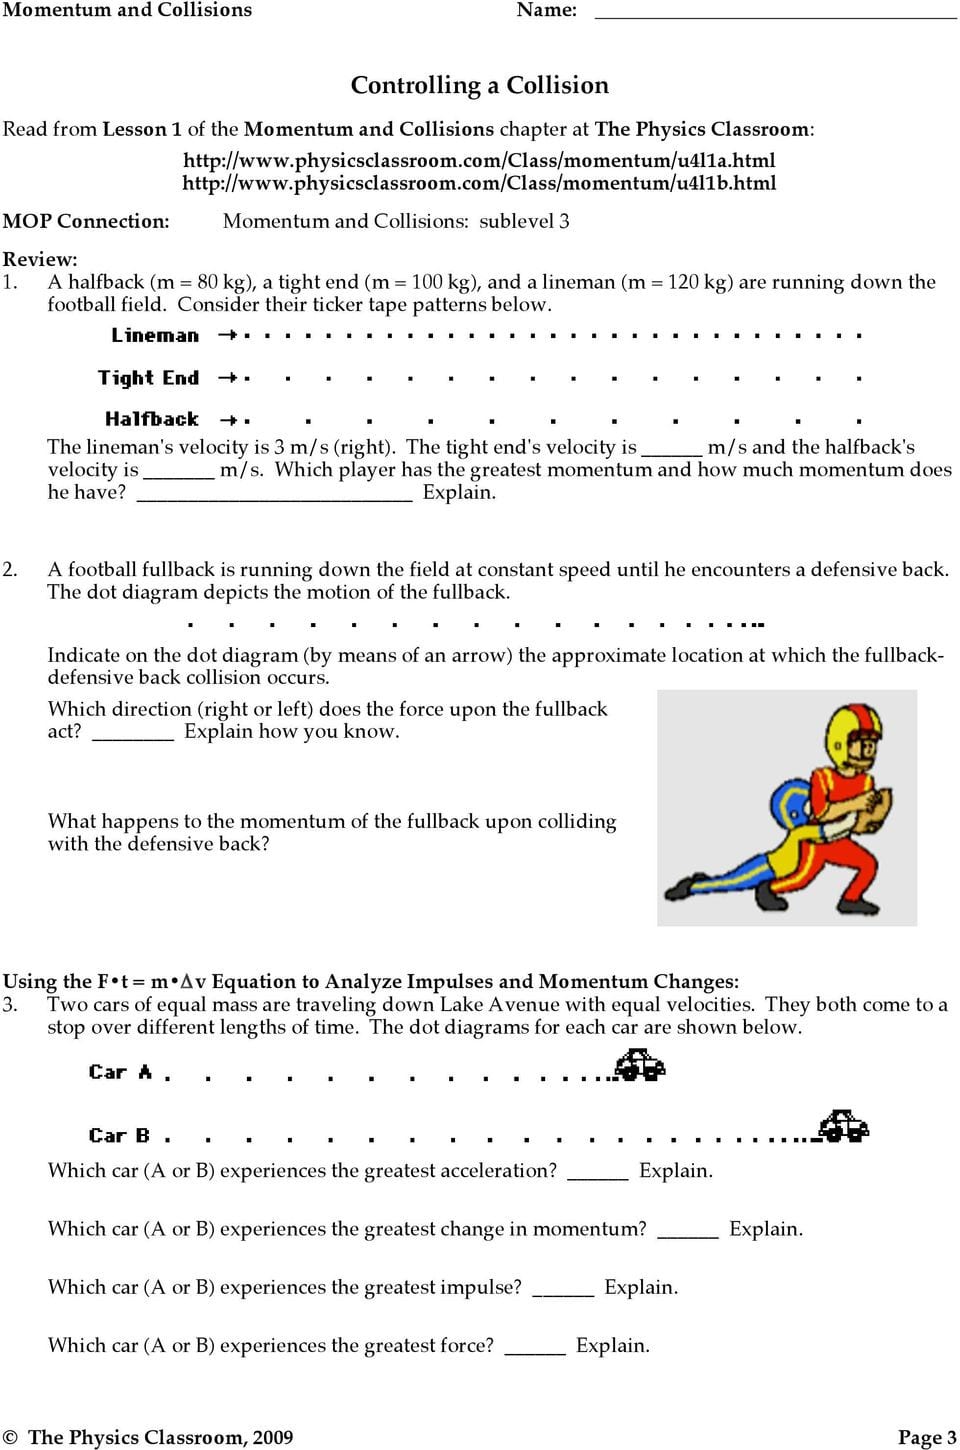 controlling-a-collision-worksheet-answers-db-excel